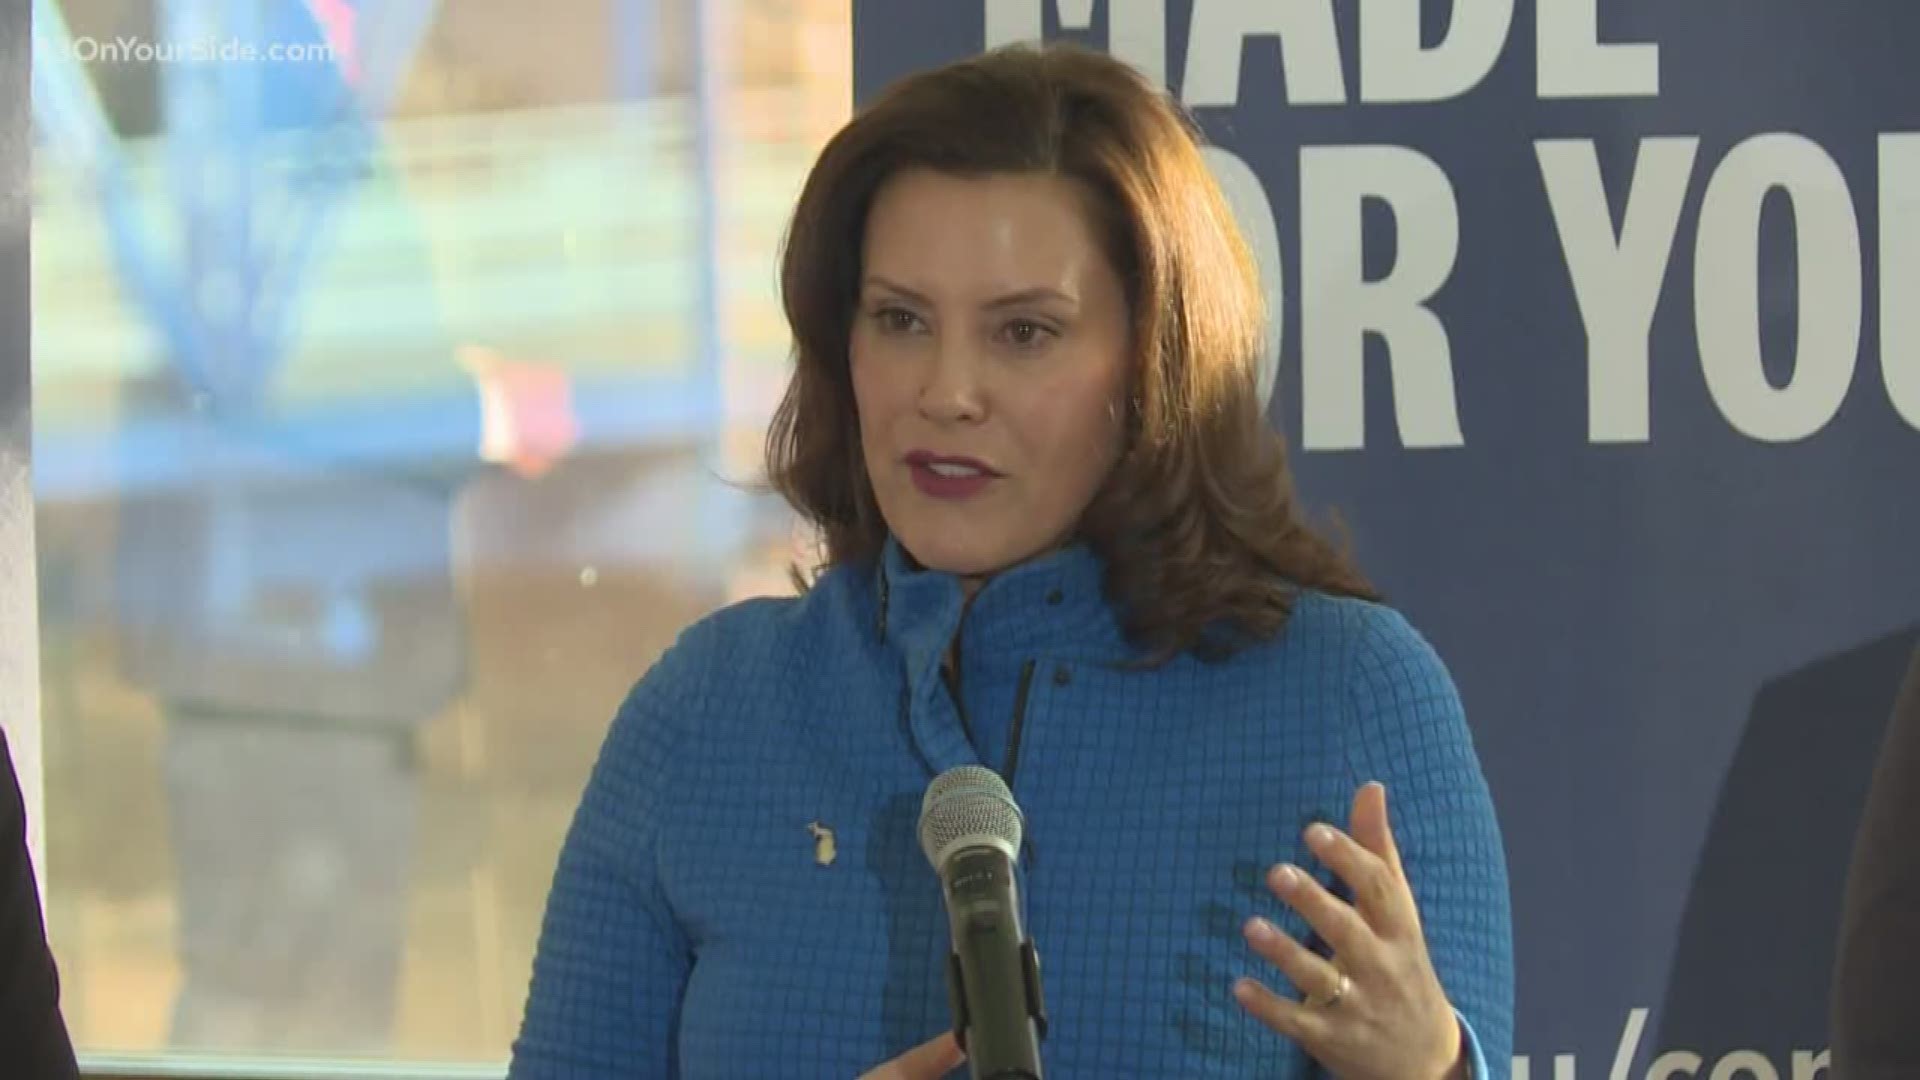 Gov. Whitmer and the GVSU president held a joint news conference to announce an education program that will allow adults to continue their education.